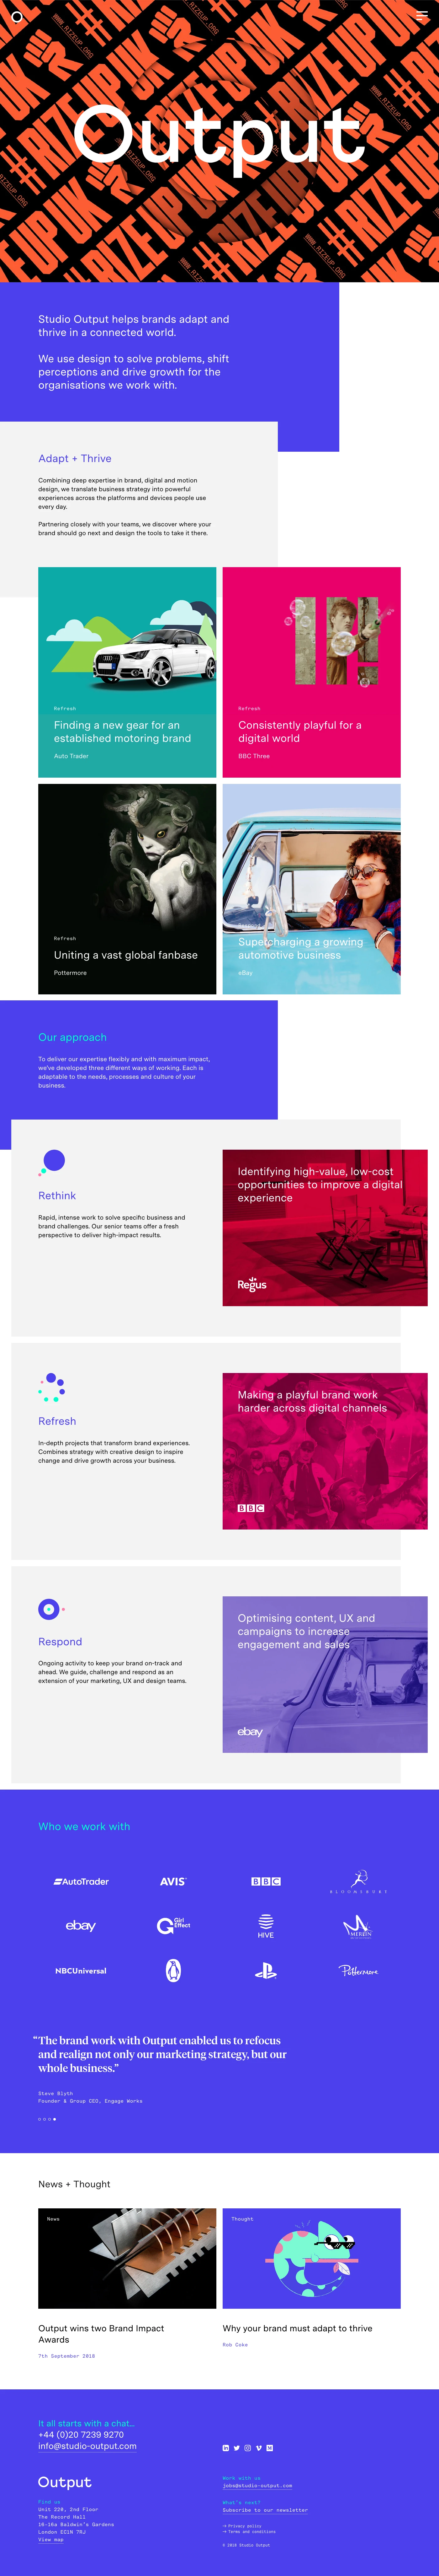 Output Landing Page Example: Studio Output helps brands adapt and thrive in a connected world. We use design to solve problems, shift perceptions and drive growth for the organisations we work with.